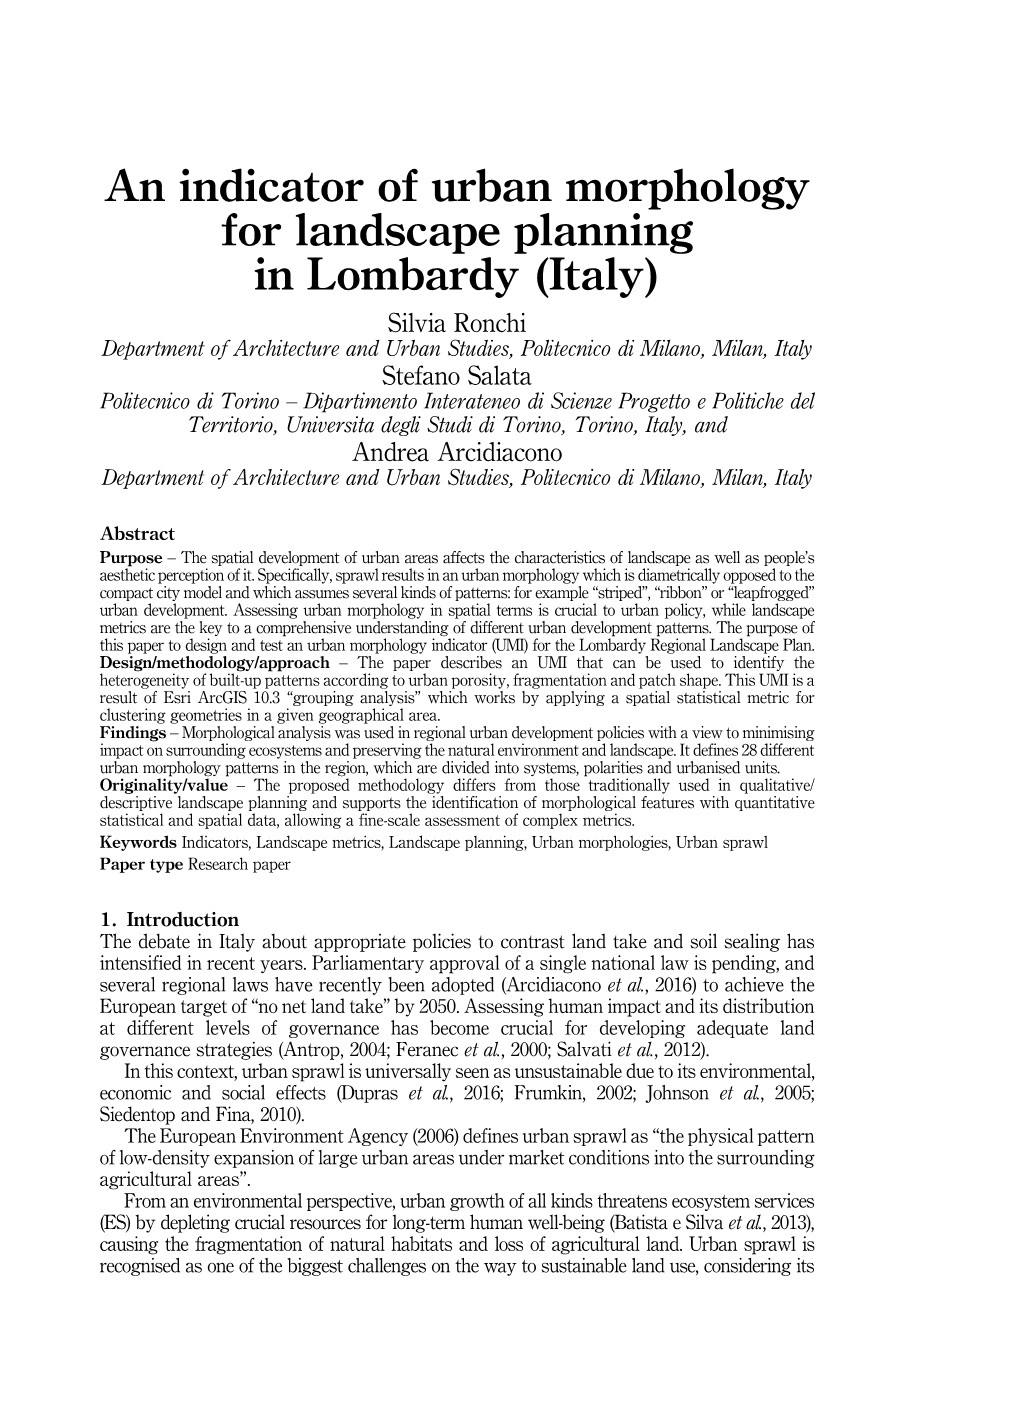 An Indicator of Urban Morphology for Landscape Planning in Lombardy